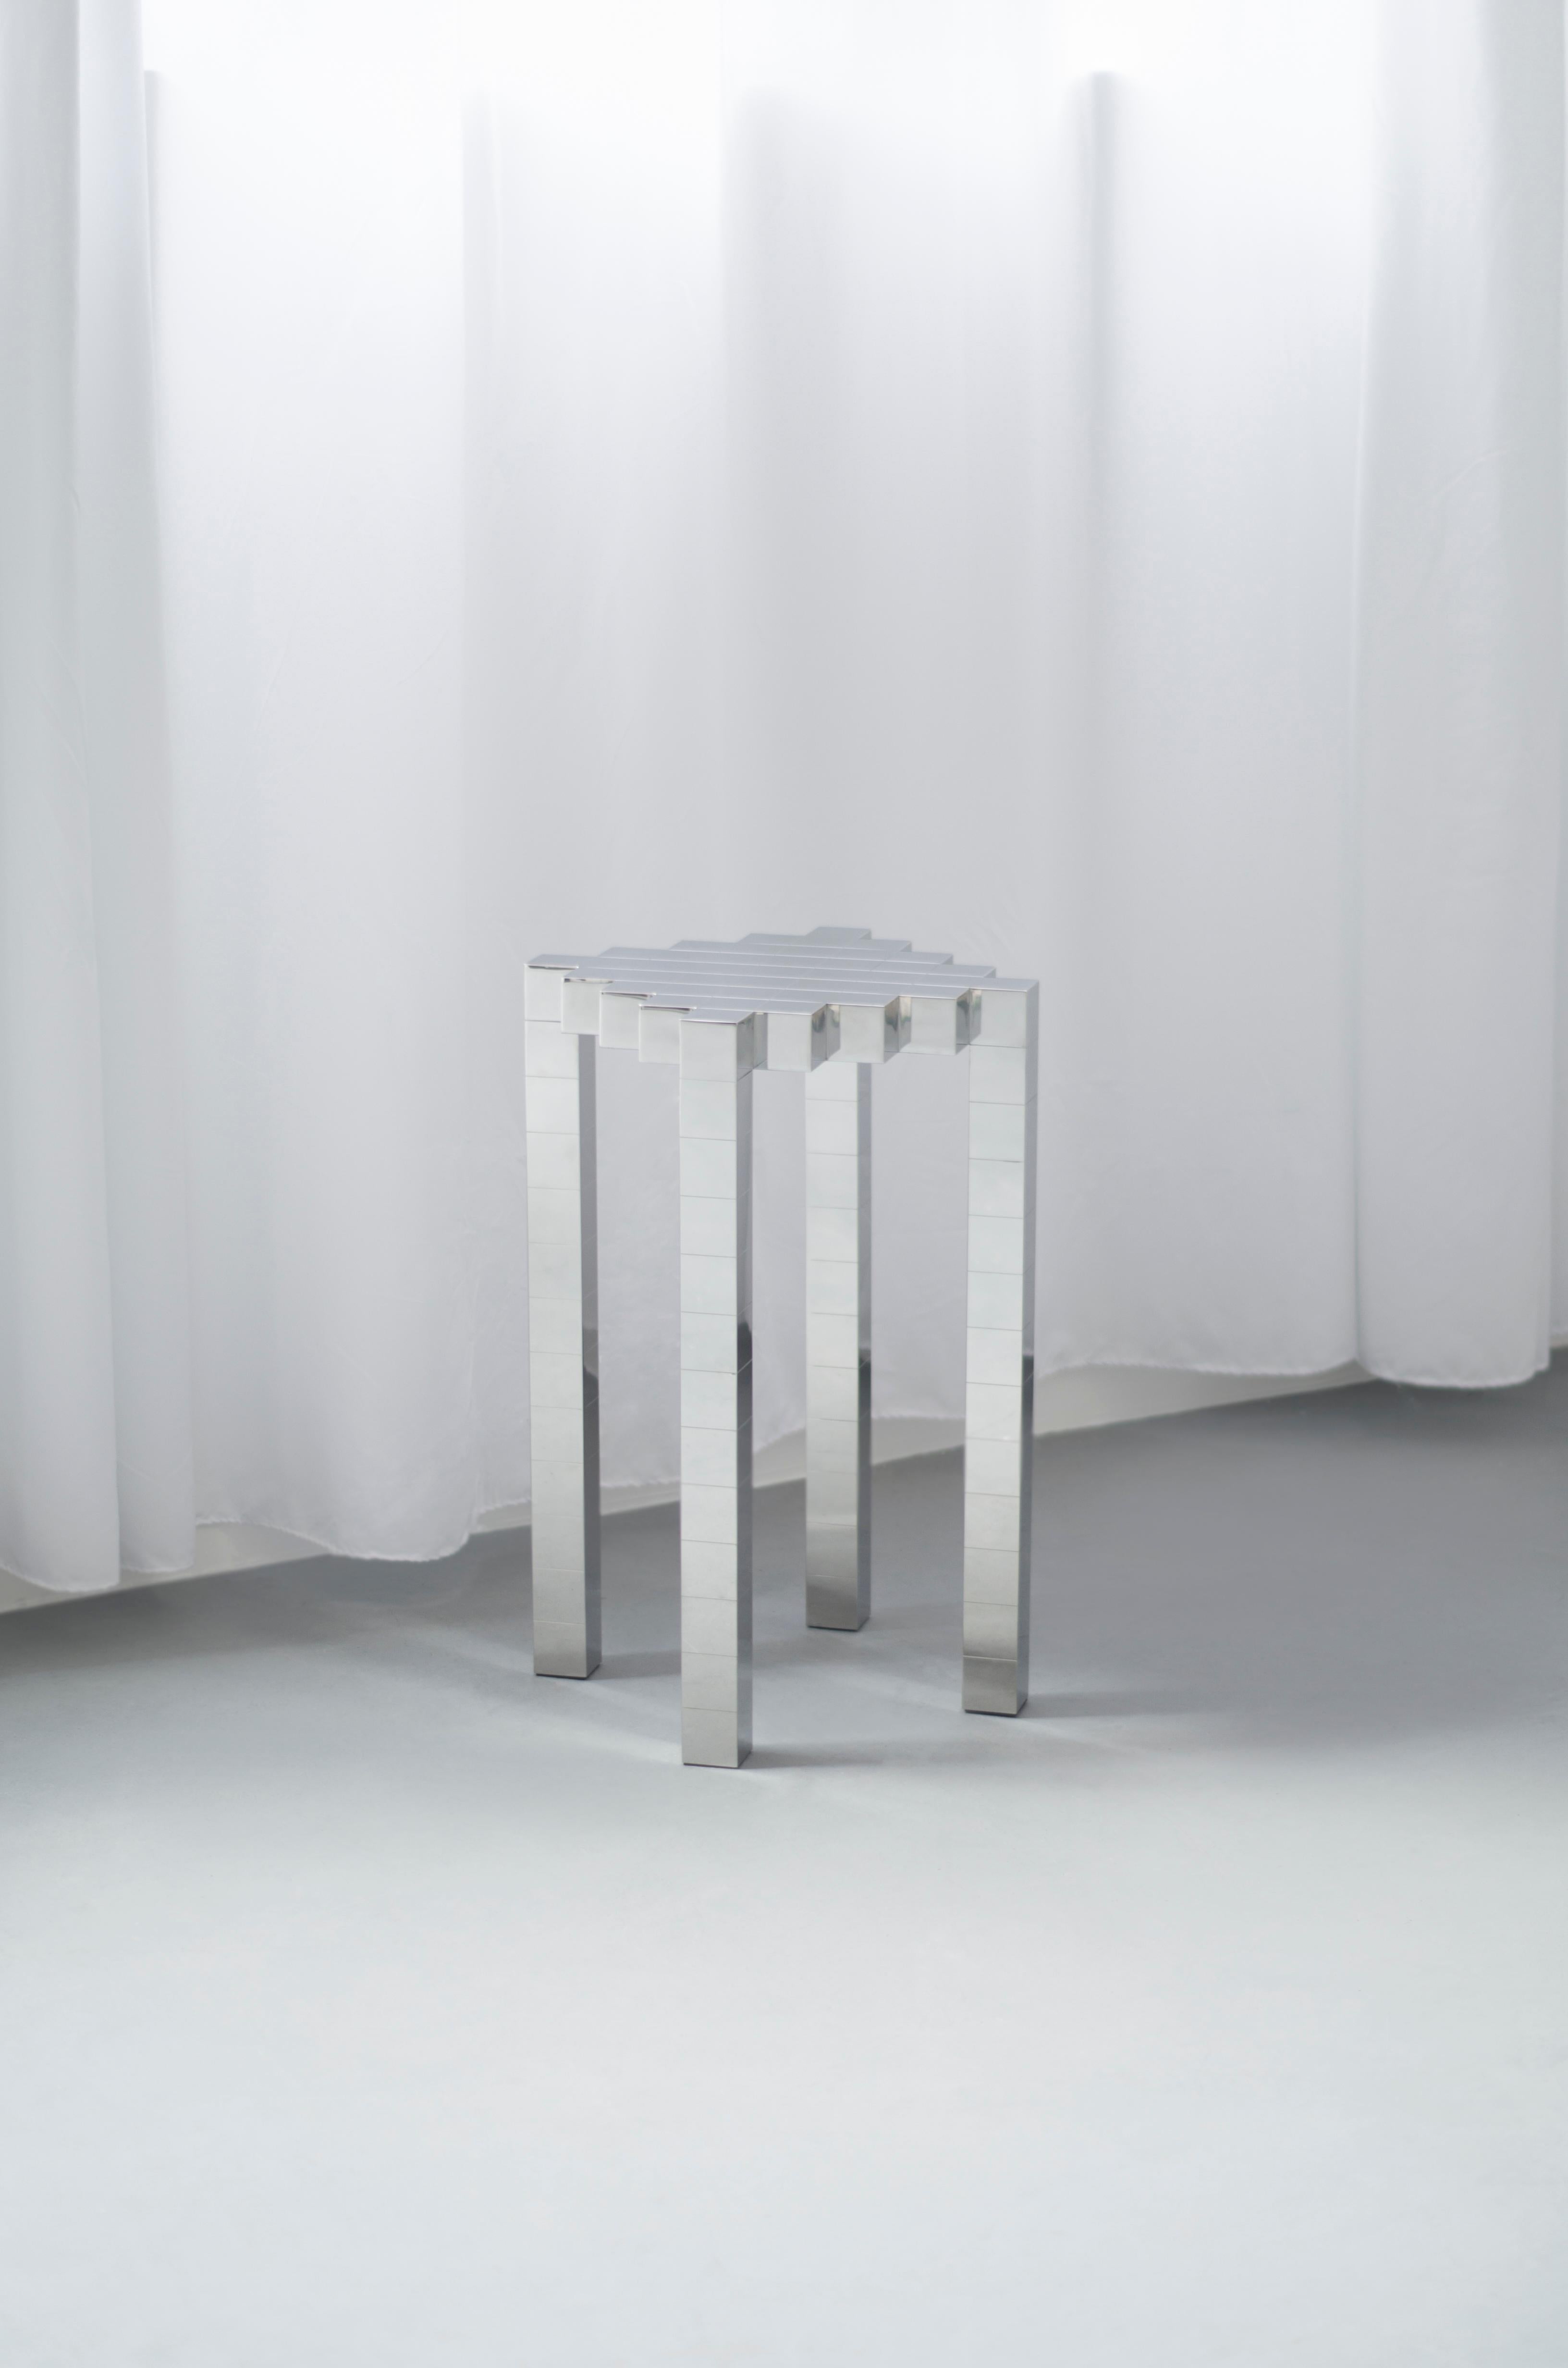 The Black Ocean Side Table comes from THESHAW's Future Vestige series. This highly geometric tabletop takes inspiration from the calm ocean that stretches out endlessly. Fashioned as if the water was sectioned into many iridescent cubes,